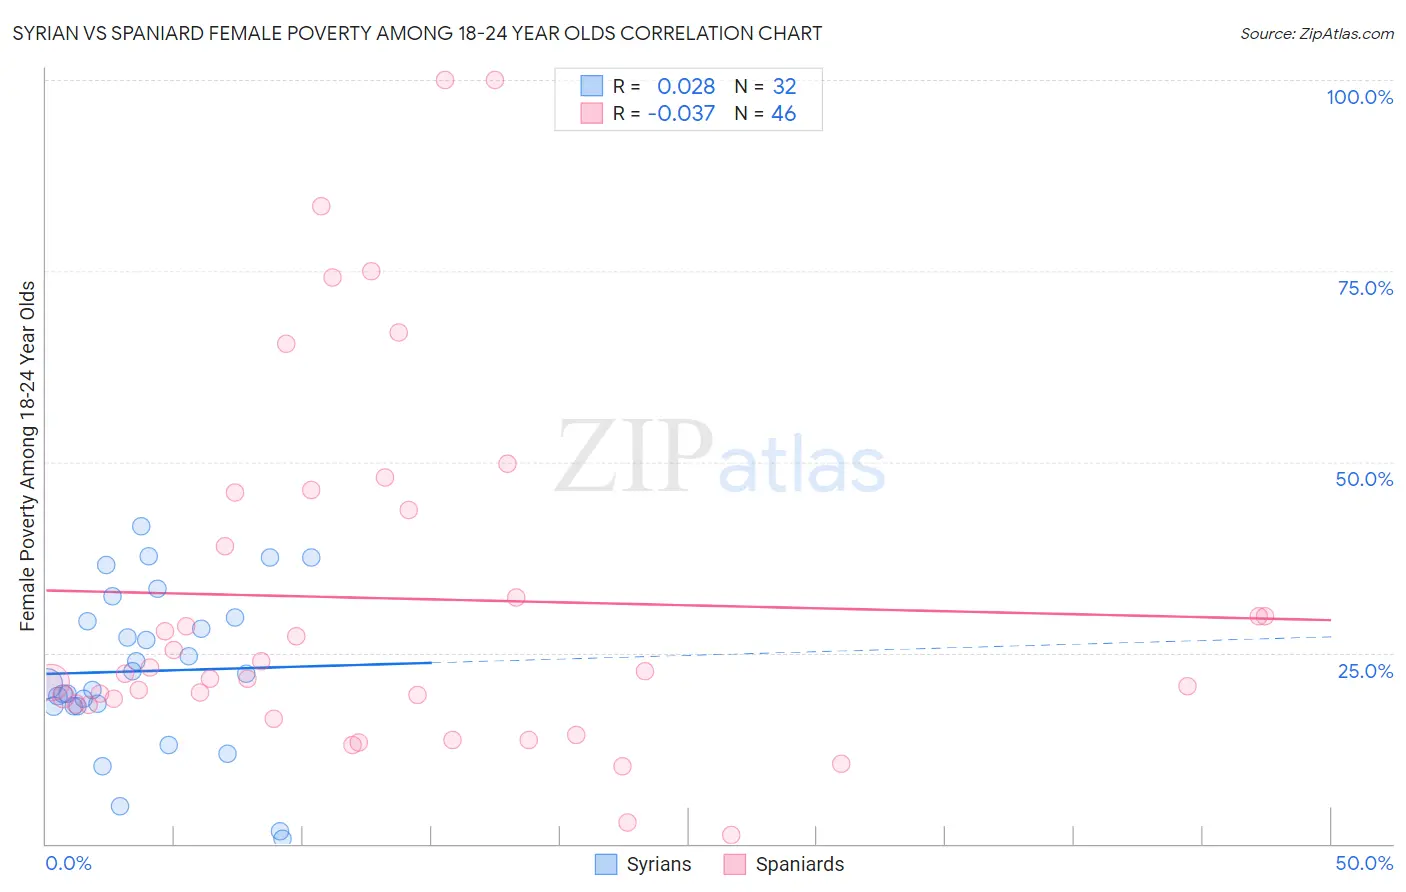 Syrian vs Spaniard Female Poverty Among 18-24 Year Olds